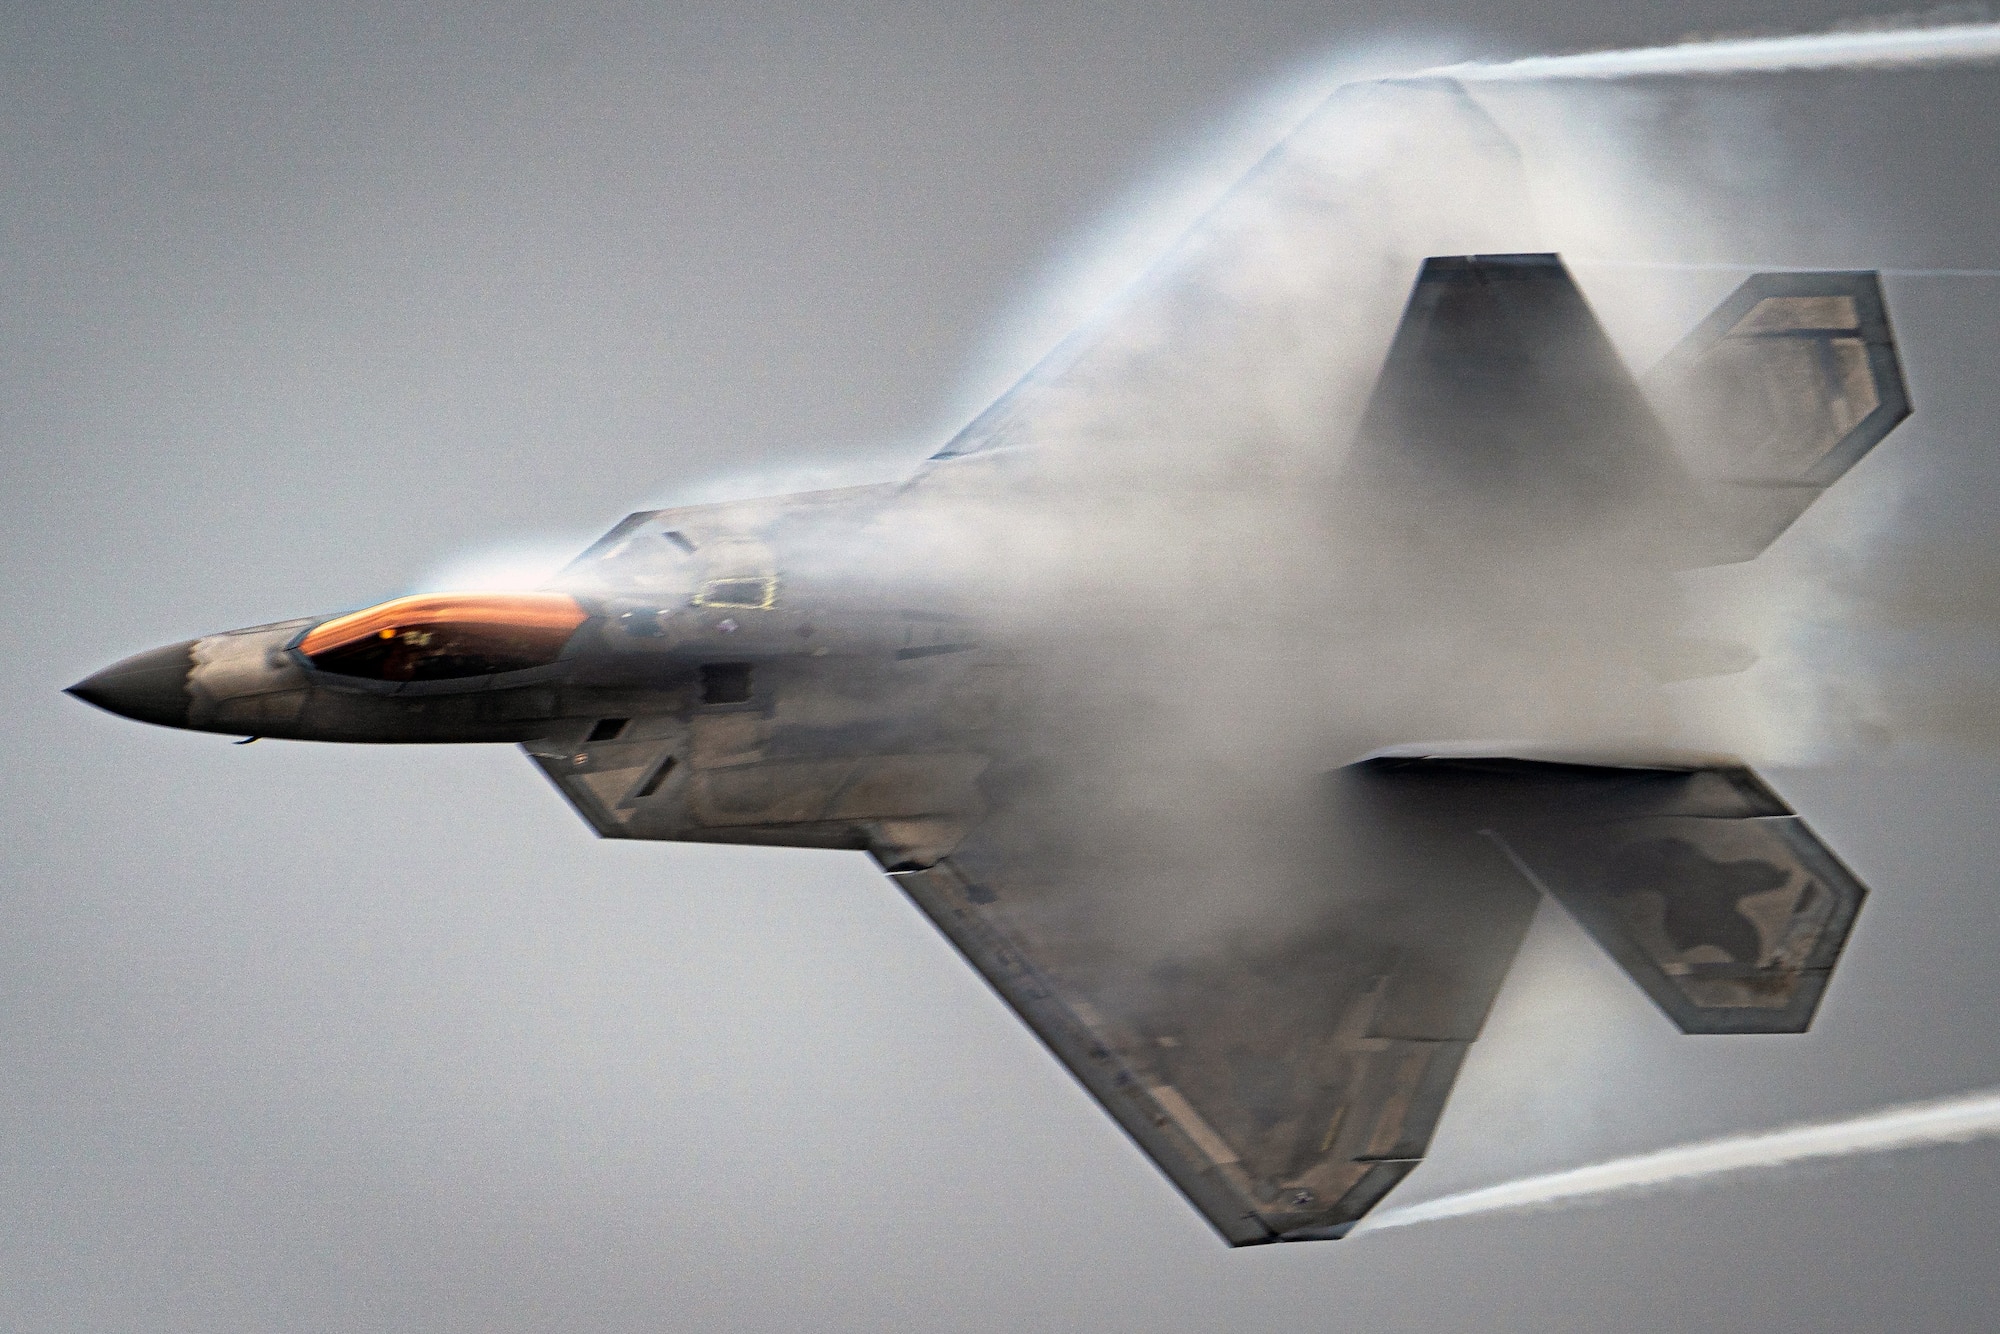 F-22 Raptor > Air Force > Fact Sheet Display” loading=”lazy” style=”width:100%;text-align:center;” /><small style=